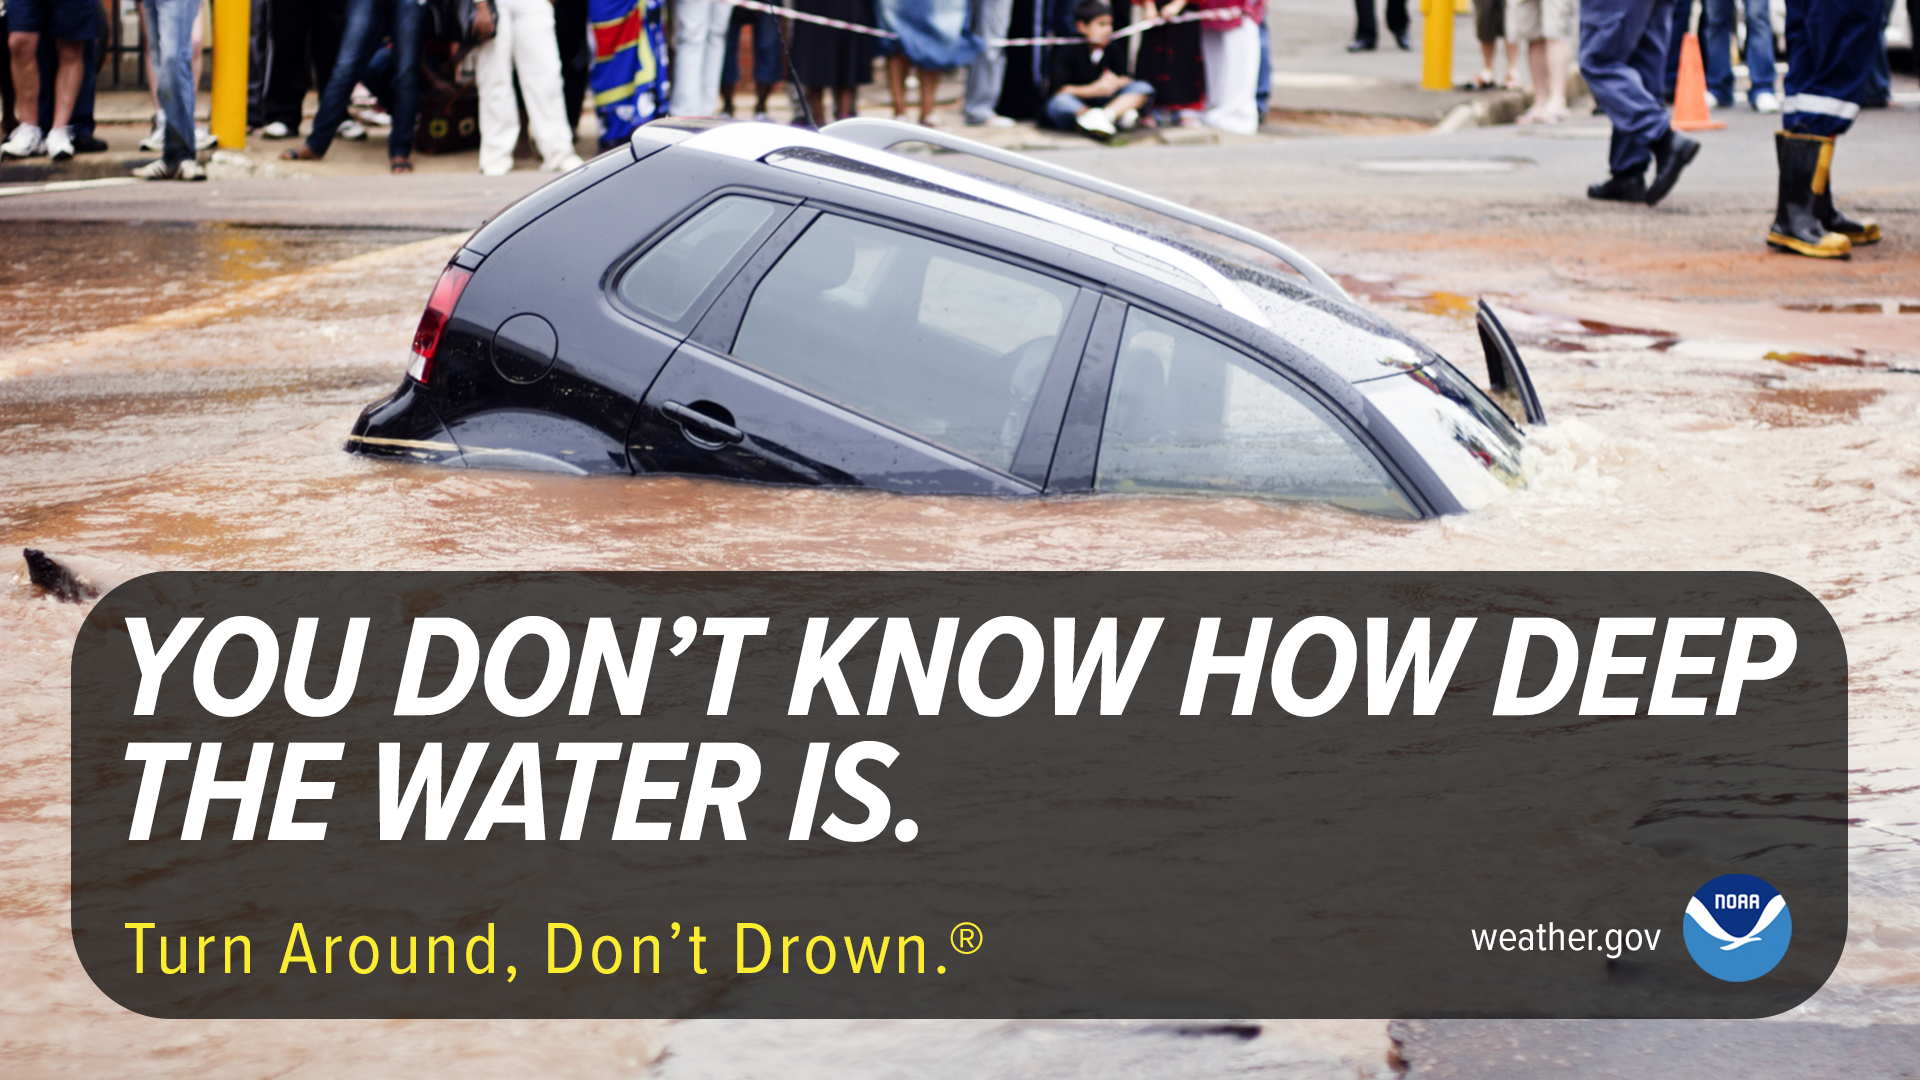 Pictured: a car submerged in water next to a sidewalk. Text: You don't know how deep the water is. Turn around, don't drown.